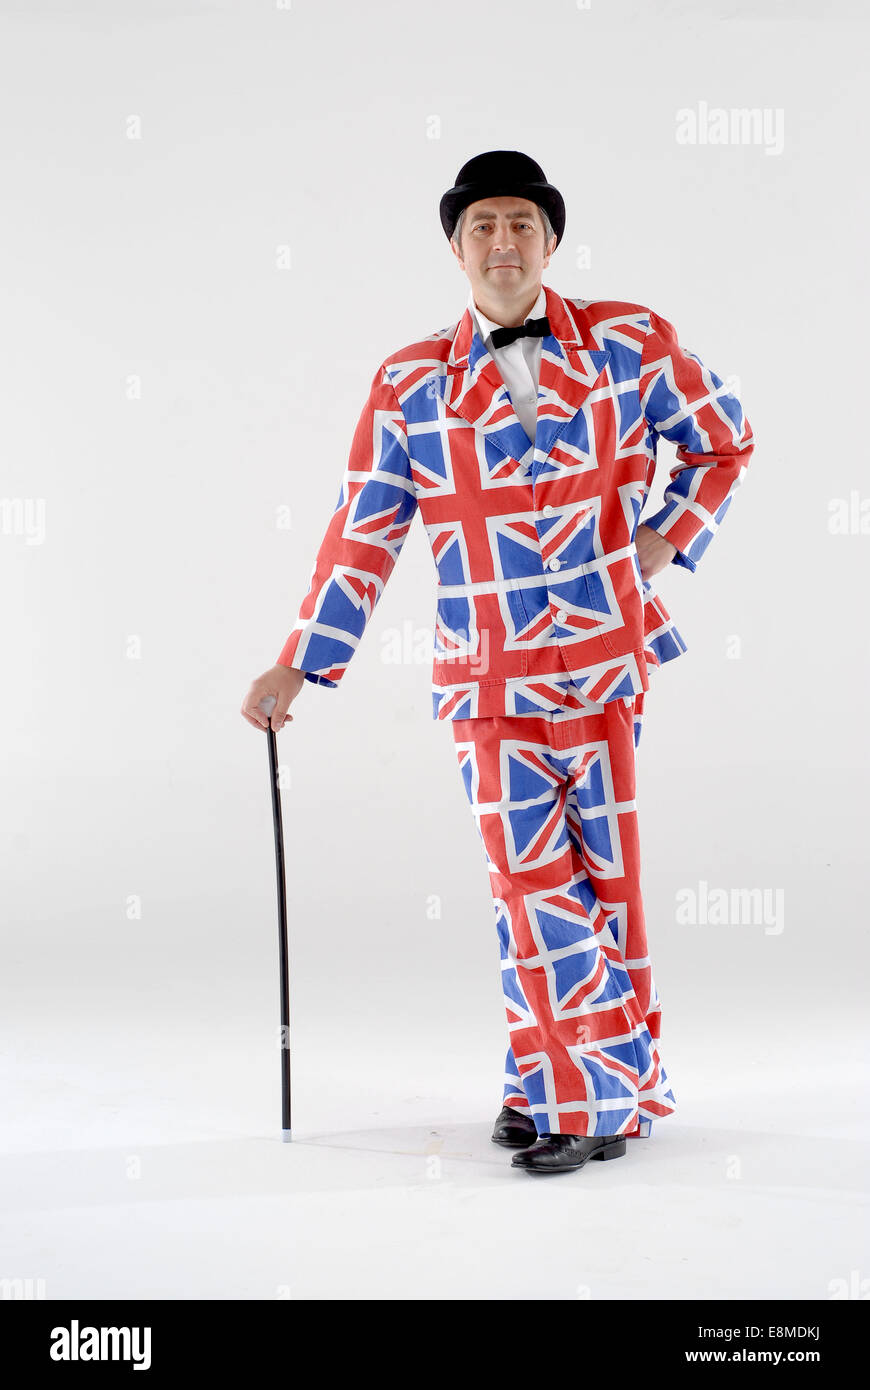 Man dressed in fancy dress comedy costume in union jack suit with ...